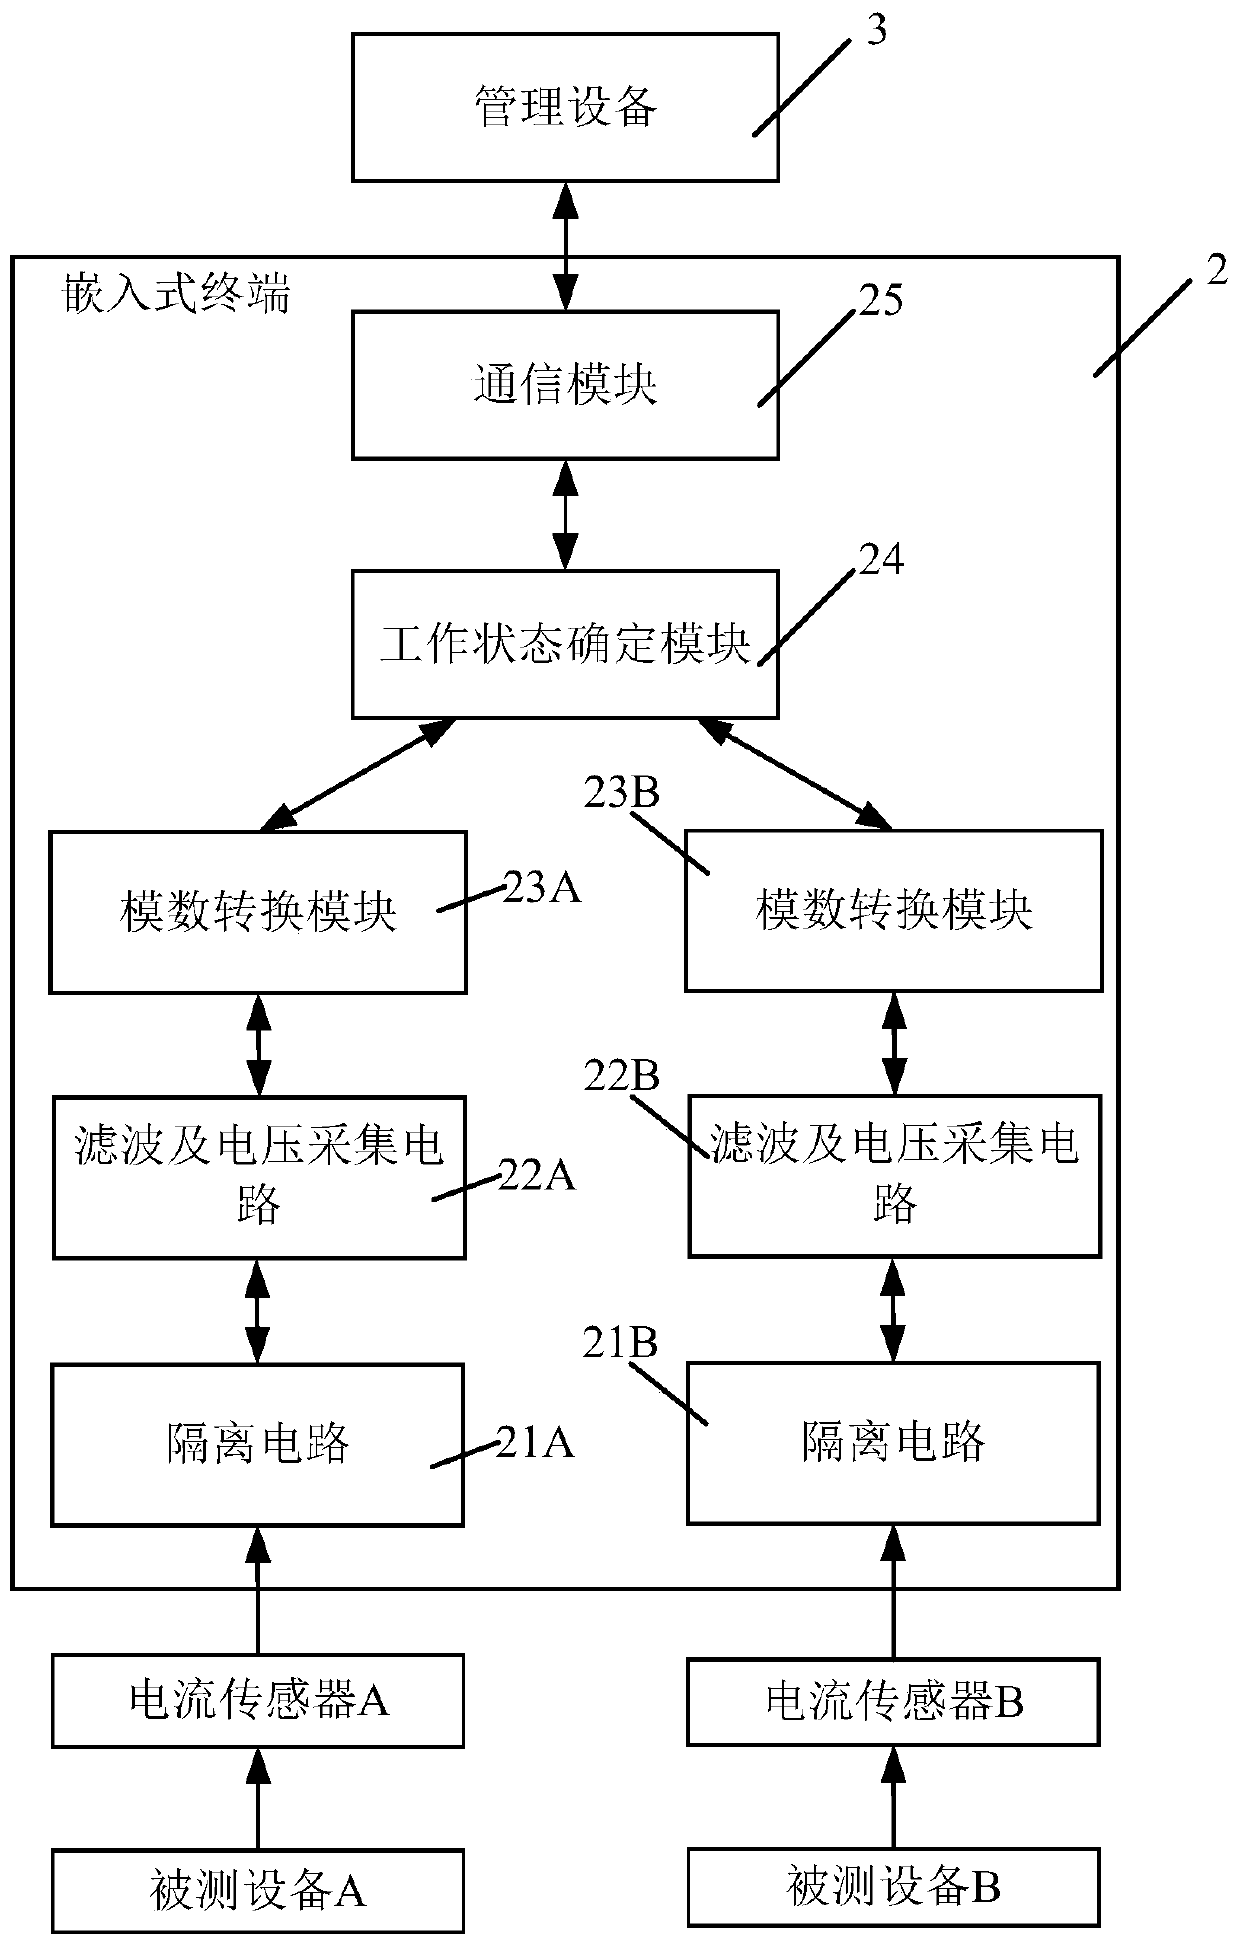 Determination method of utilization rate and terminal